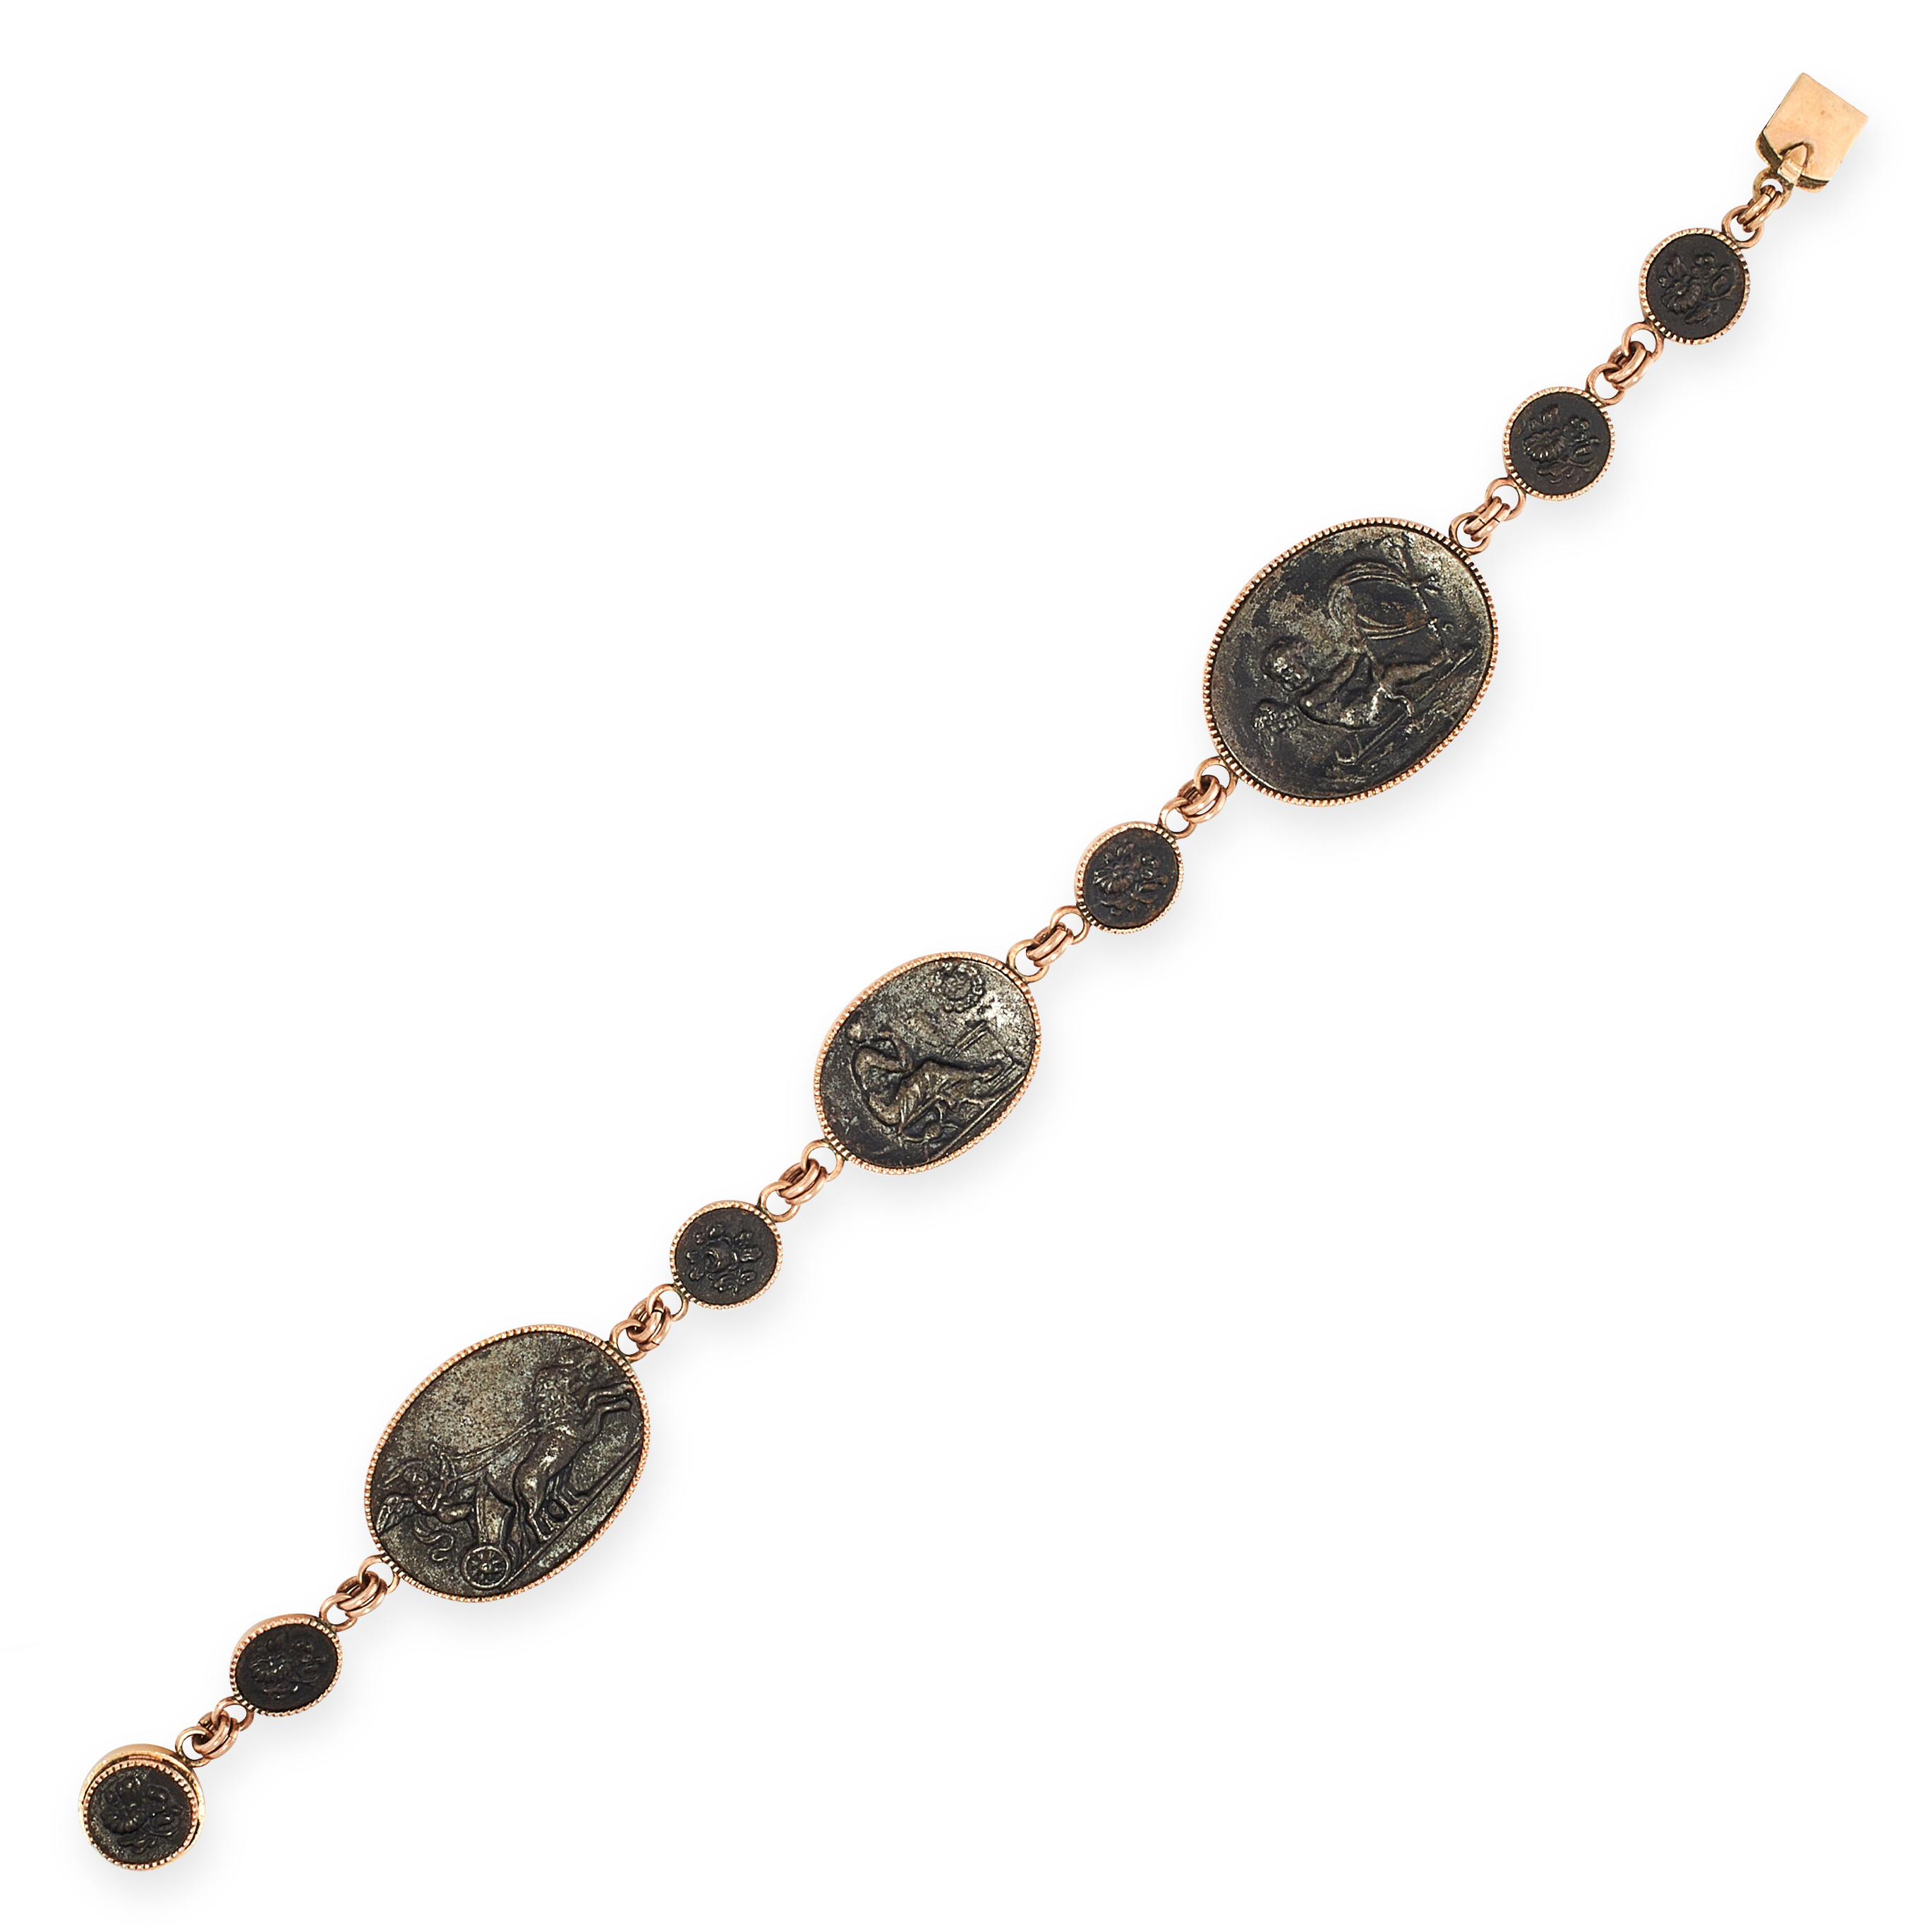 AN ANTIQUE BERLIN IRONWORK BRACELET in yellow gold and iron, formed of a trio of principal iron